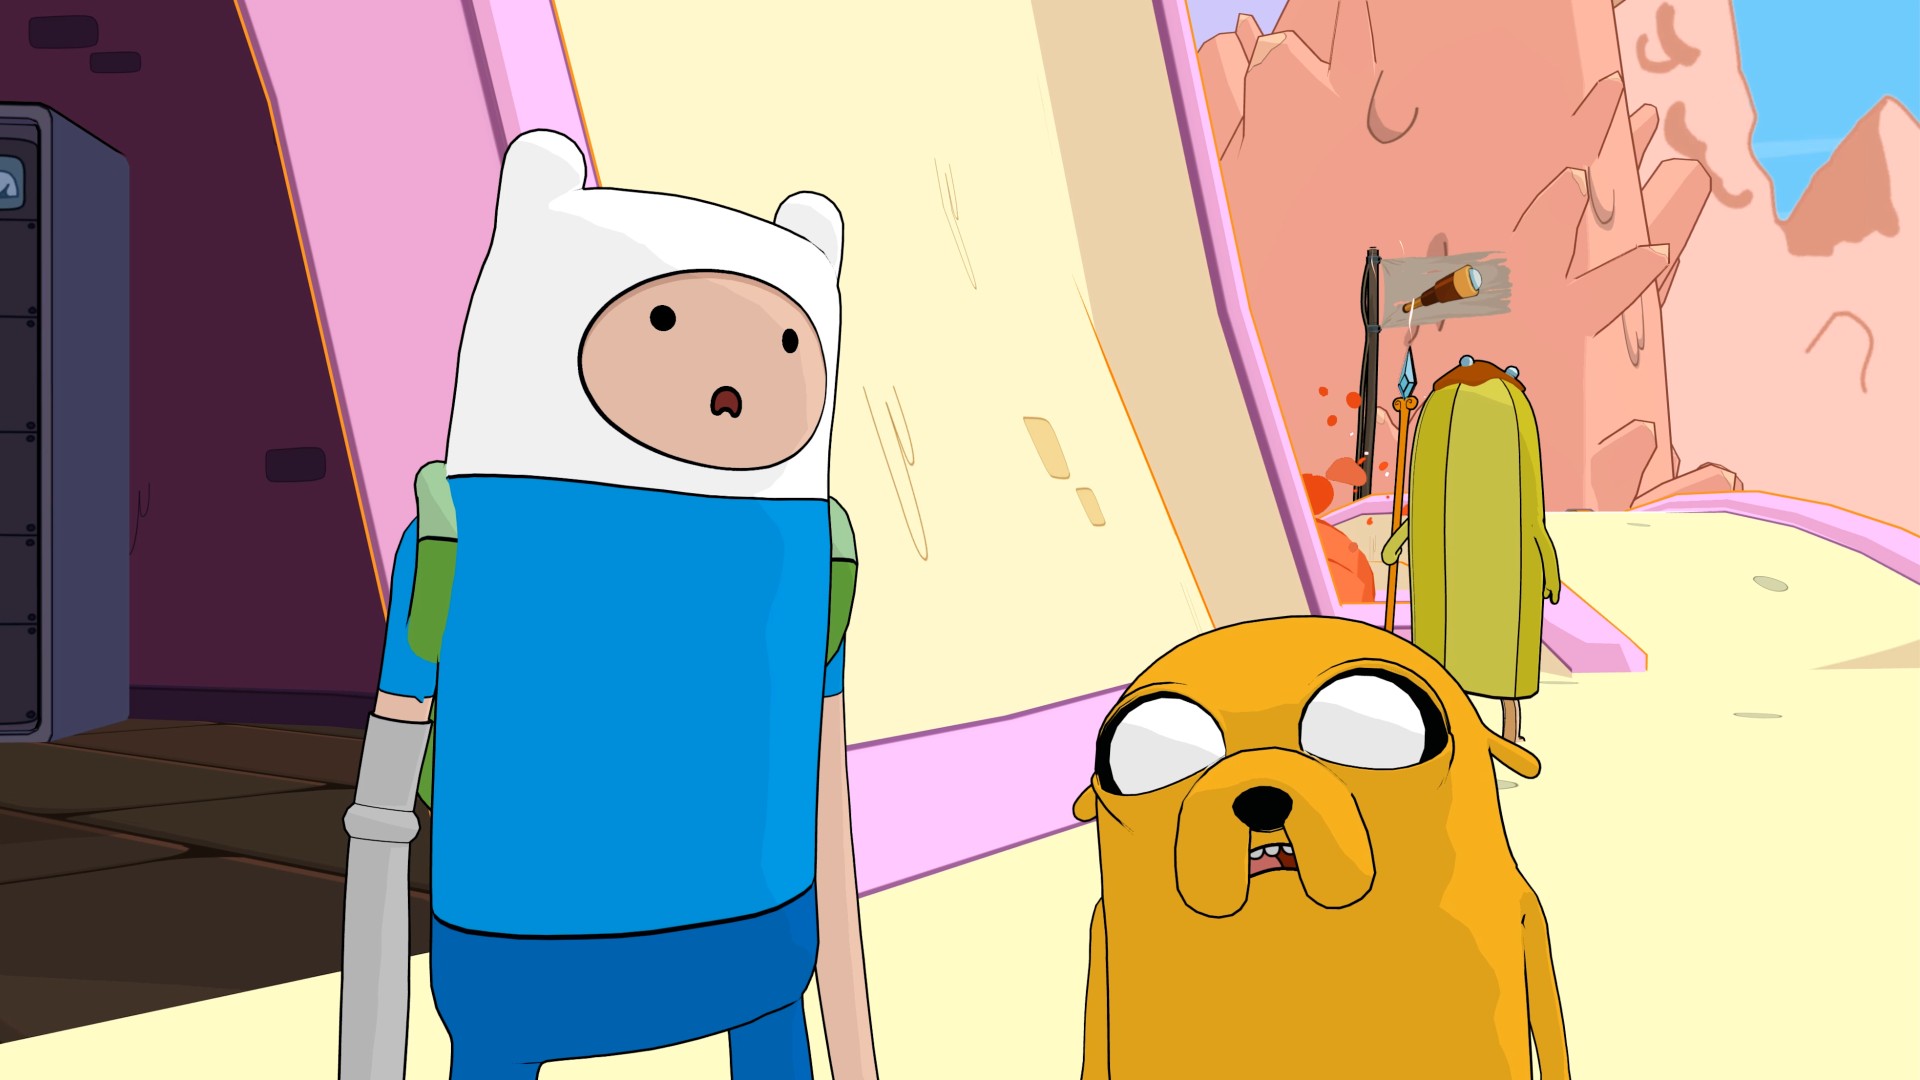 Adventure Time: Pirates of the Enchiridion sets sail next year